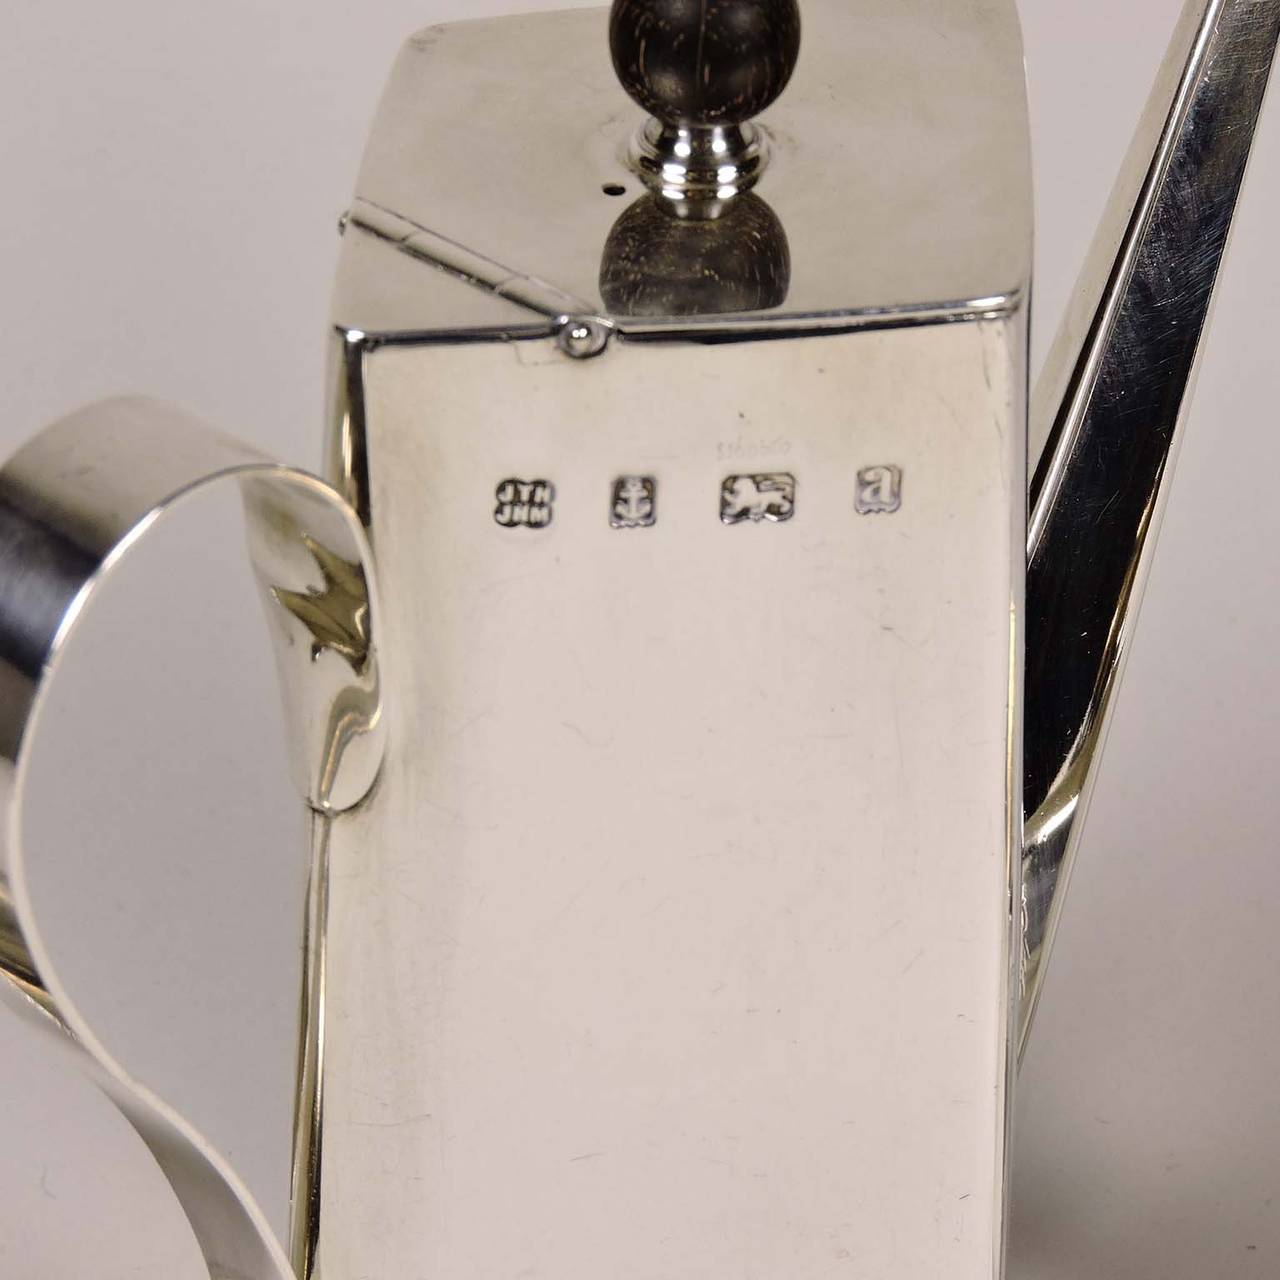 English Silver Three Piece Coffee Service, c. 1900.  Christopher Dresser design, marked JTH/JHM for John Thomas Heath & John Hartshorne Middleton, with sterling and Birmingham marks and date stamped for 1900.  Including a four sided coffee pot with